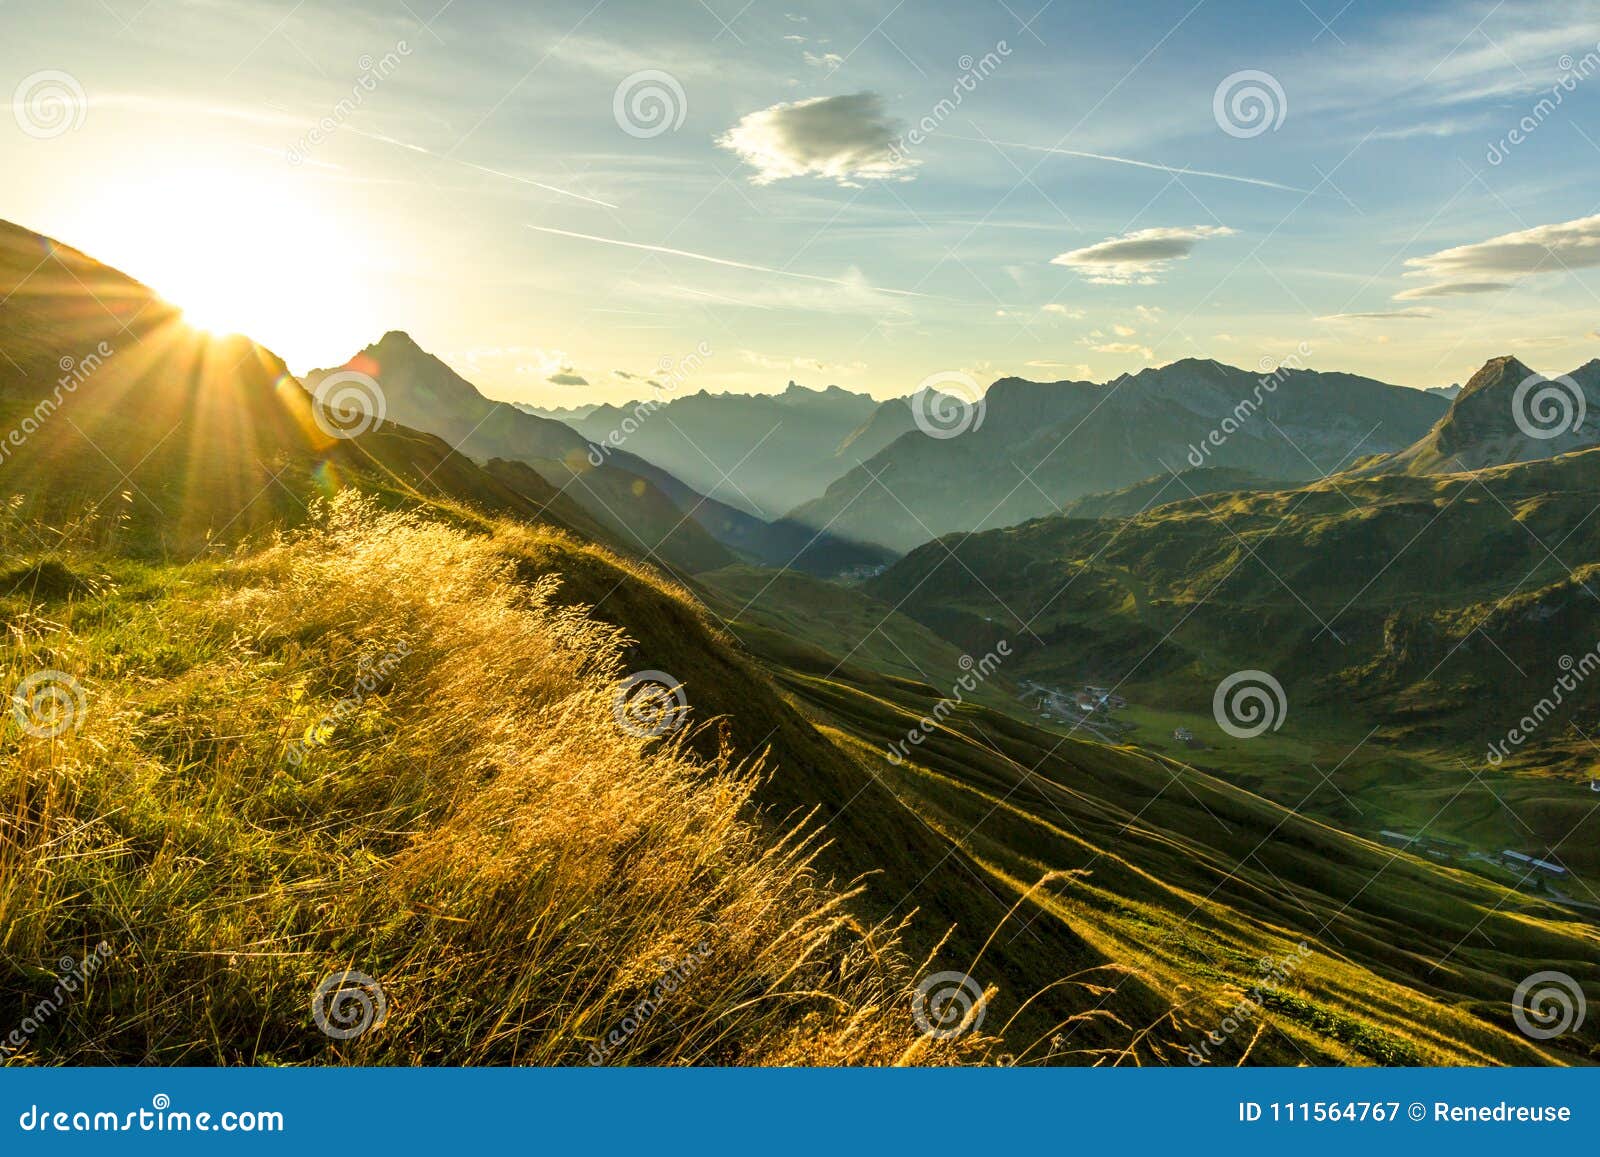 beautiful sunrise and layered mountain silhouettes in early morning. lechtal and allgau alps, bavaria and austria.